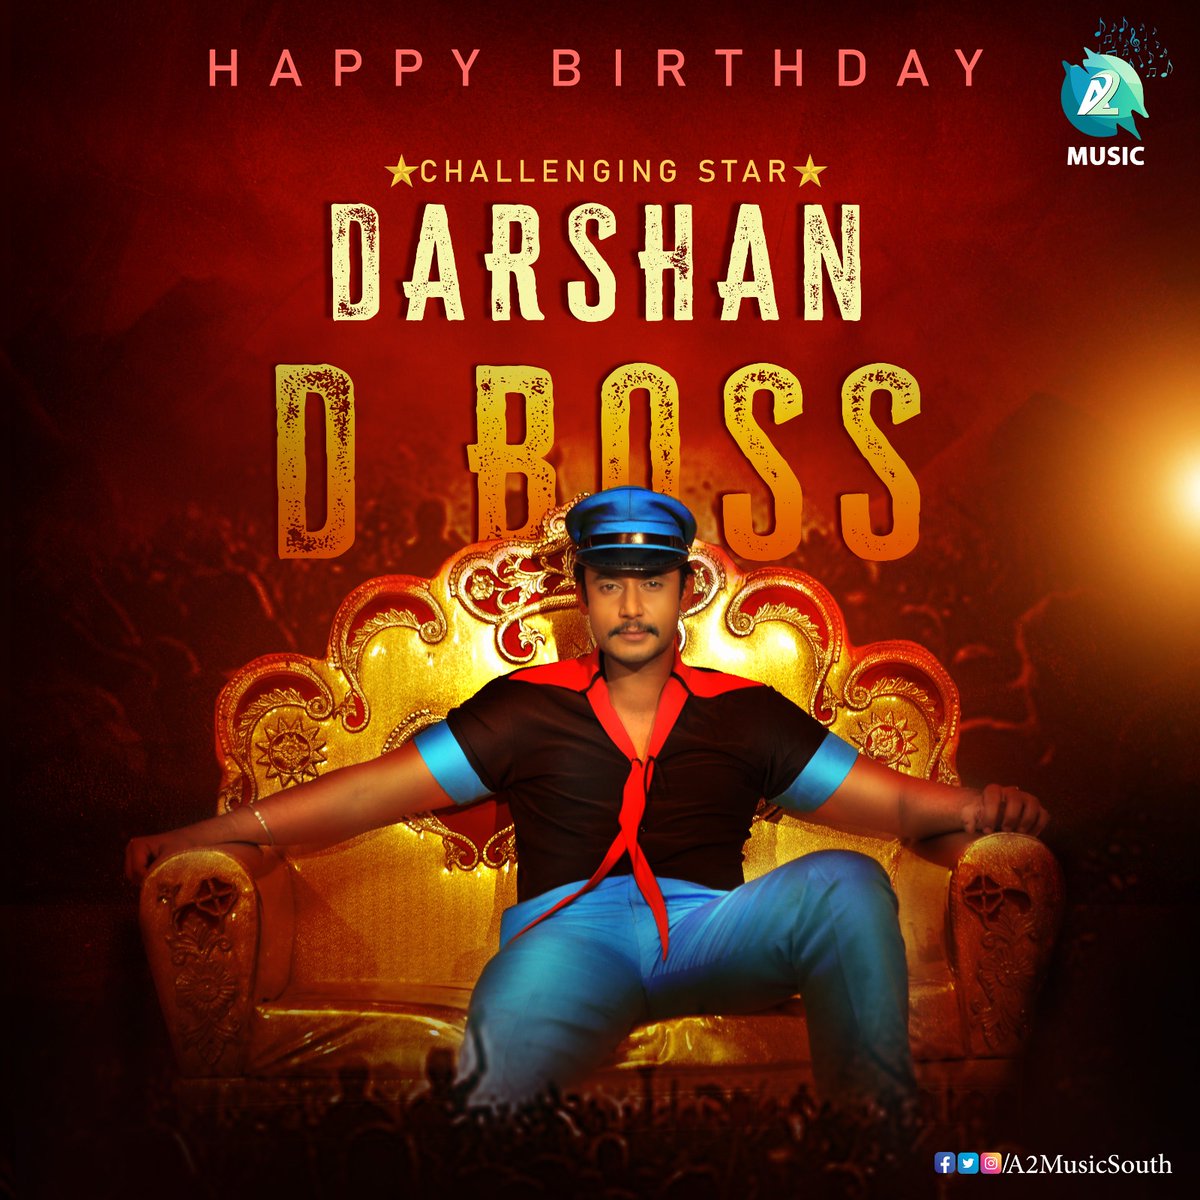 Happy Birthday to the one and only challenging star 
@dasadarshan
 D Boss! Wishing you a year filled with joy, success, and all the things that make you happy. Keep entertaining us with your amazing movies and performances. 

#A2music #HappyBirthdayDarshan #Dboss #ChallengingStar